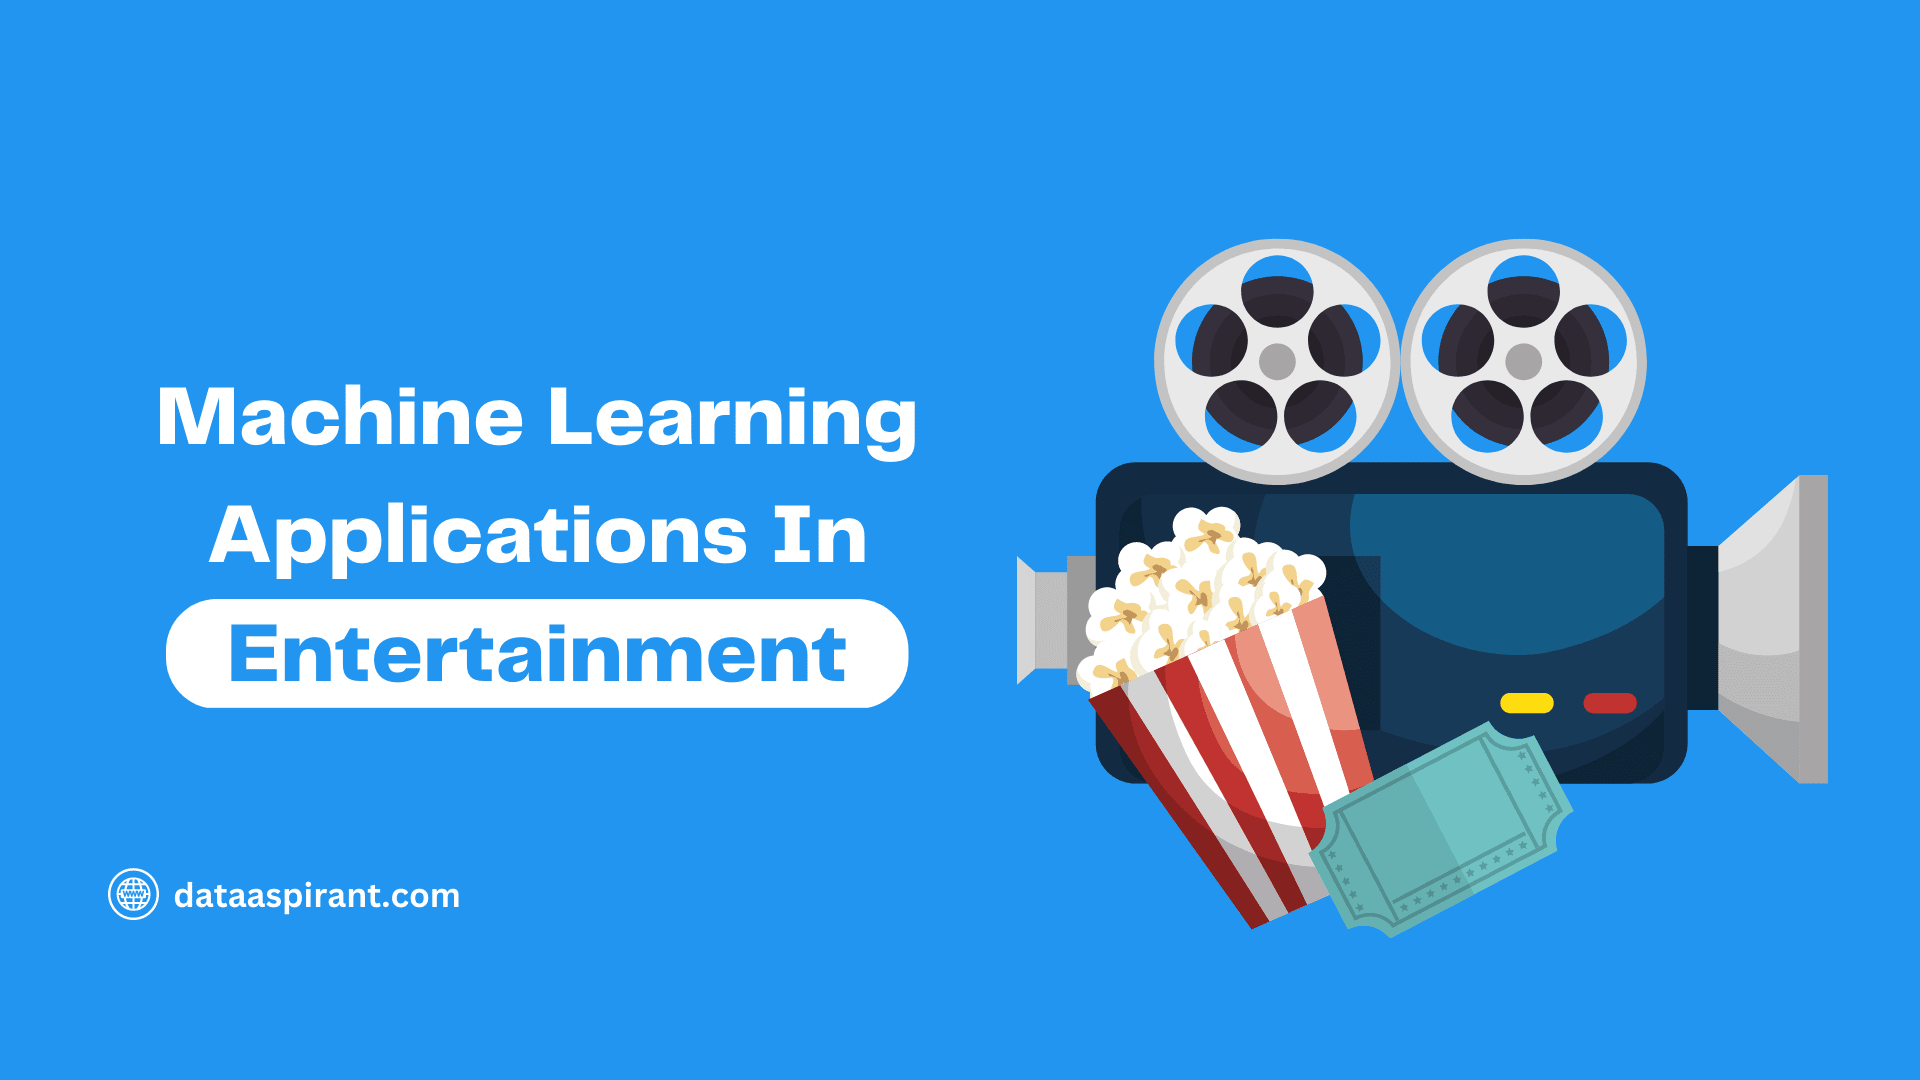 Entertainment with Machine Learning